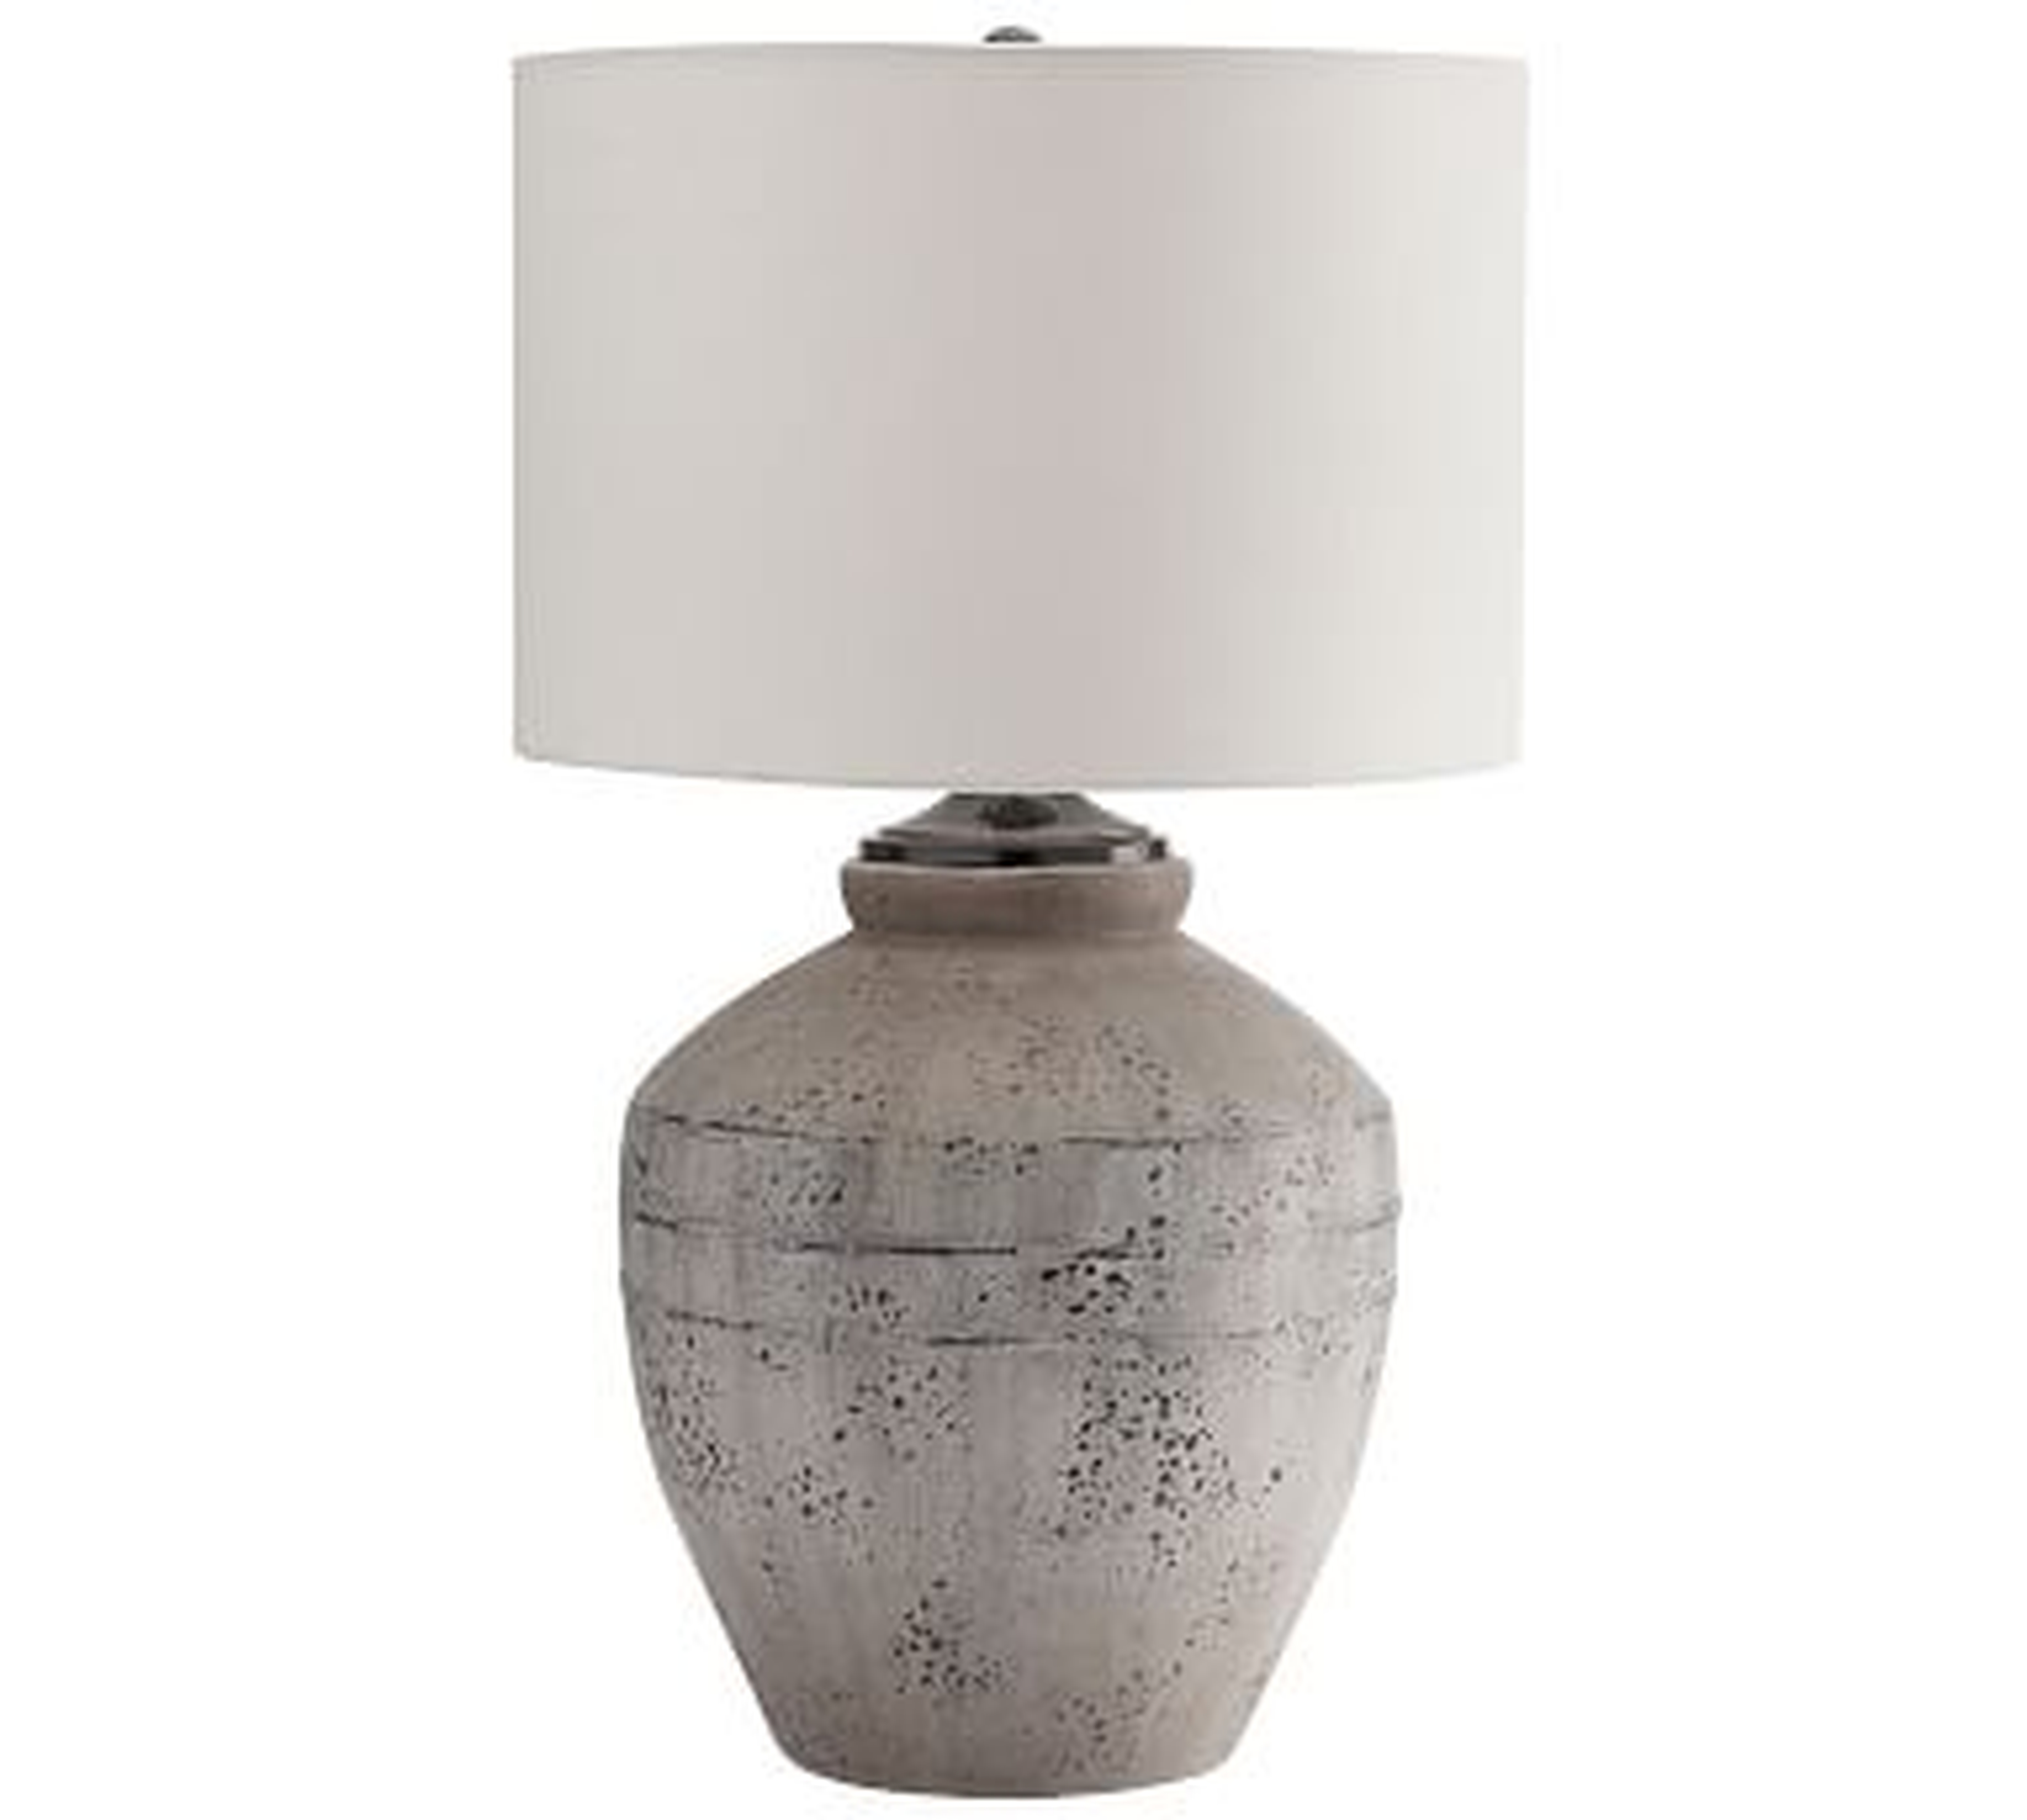 Maddox Ceramic Table Lamp, Rustic Gray Base With Medium Gallery Straight Sided Drum Shade, White - Pottery Barn